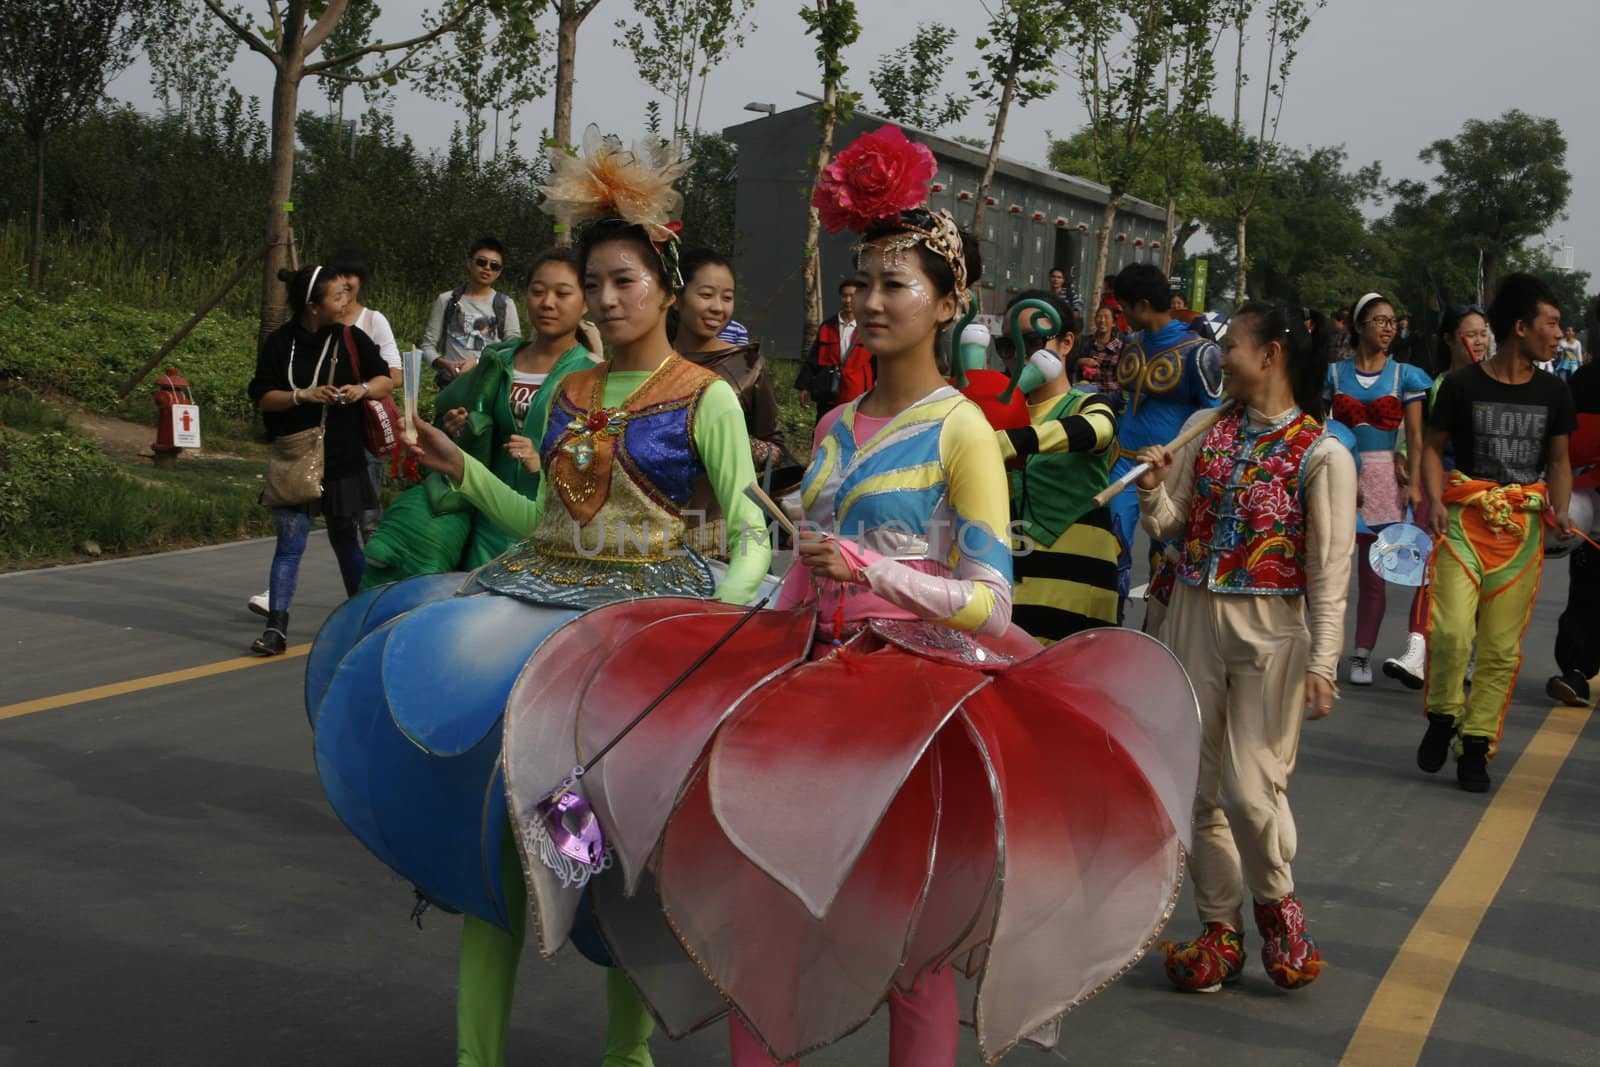 Parade at the Garden Expo in Xi'an by koep